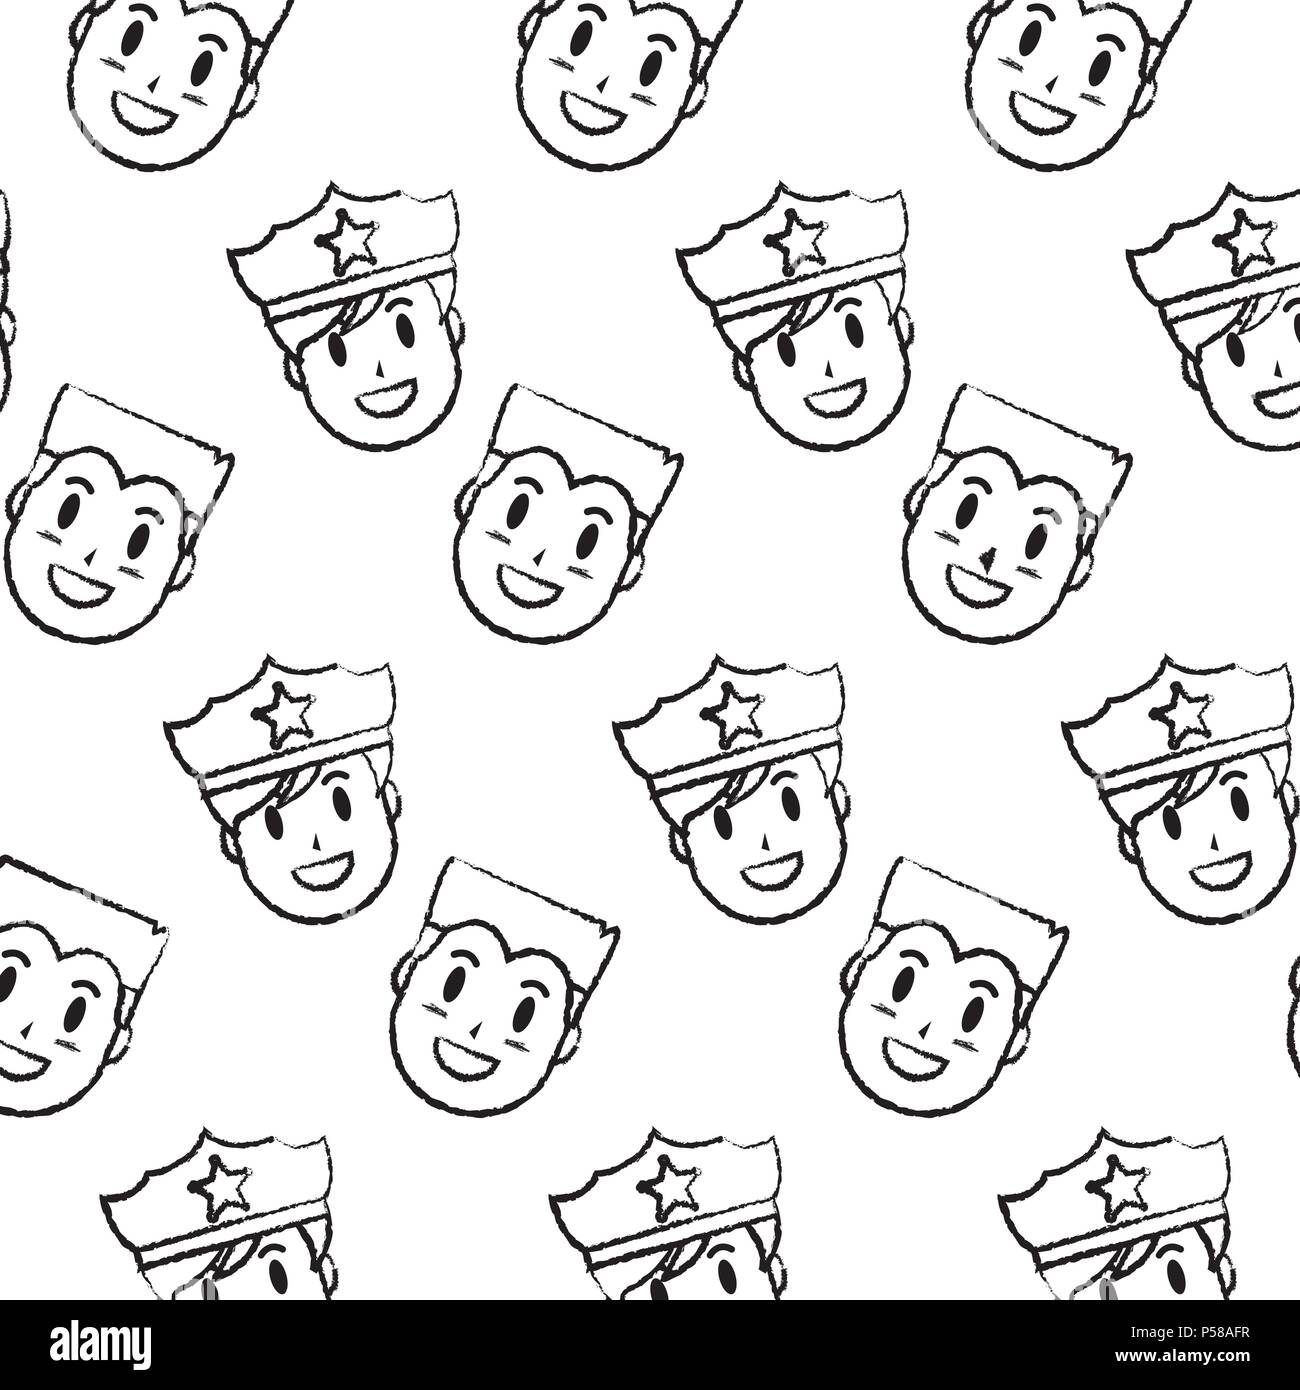 grunge happy policeman and man heads background vector illustration Stock Vector